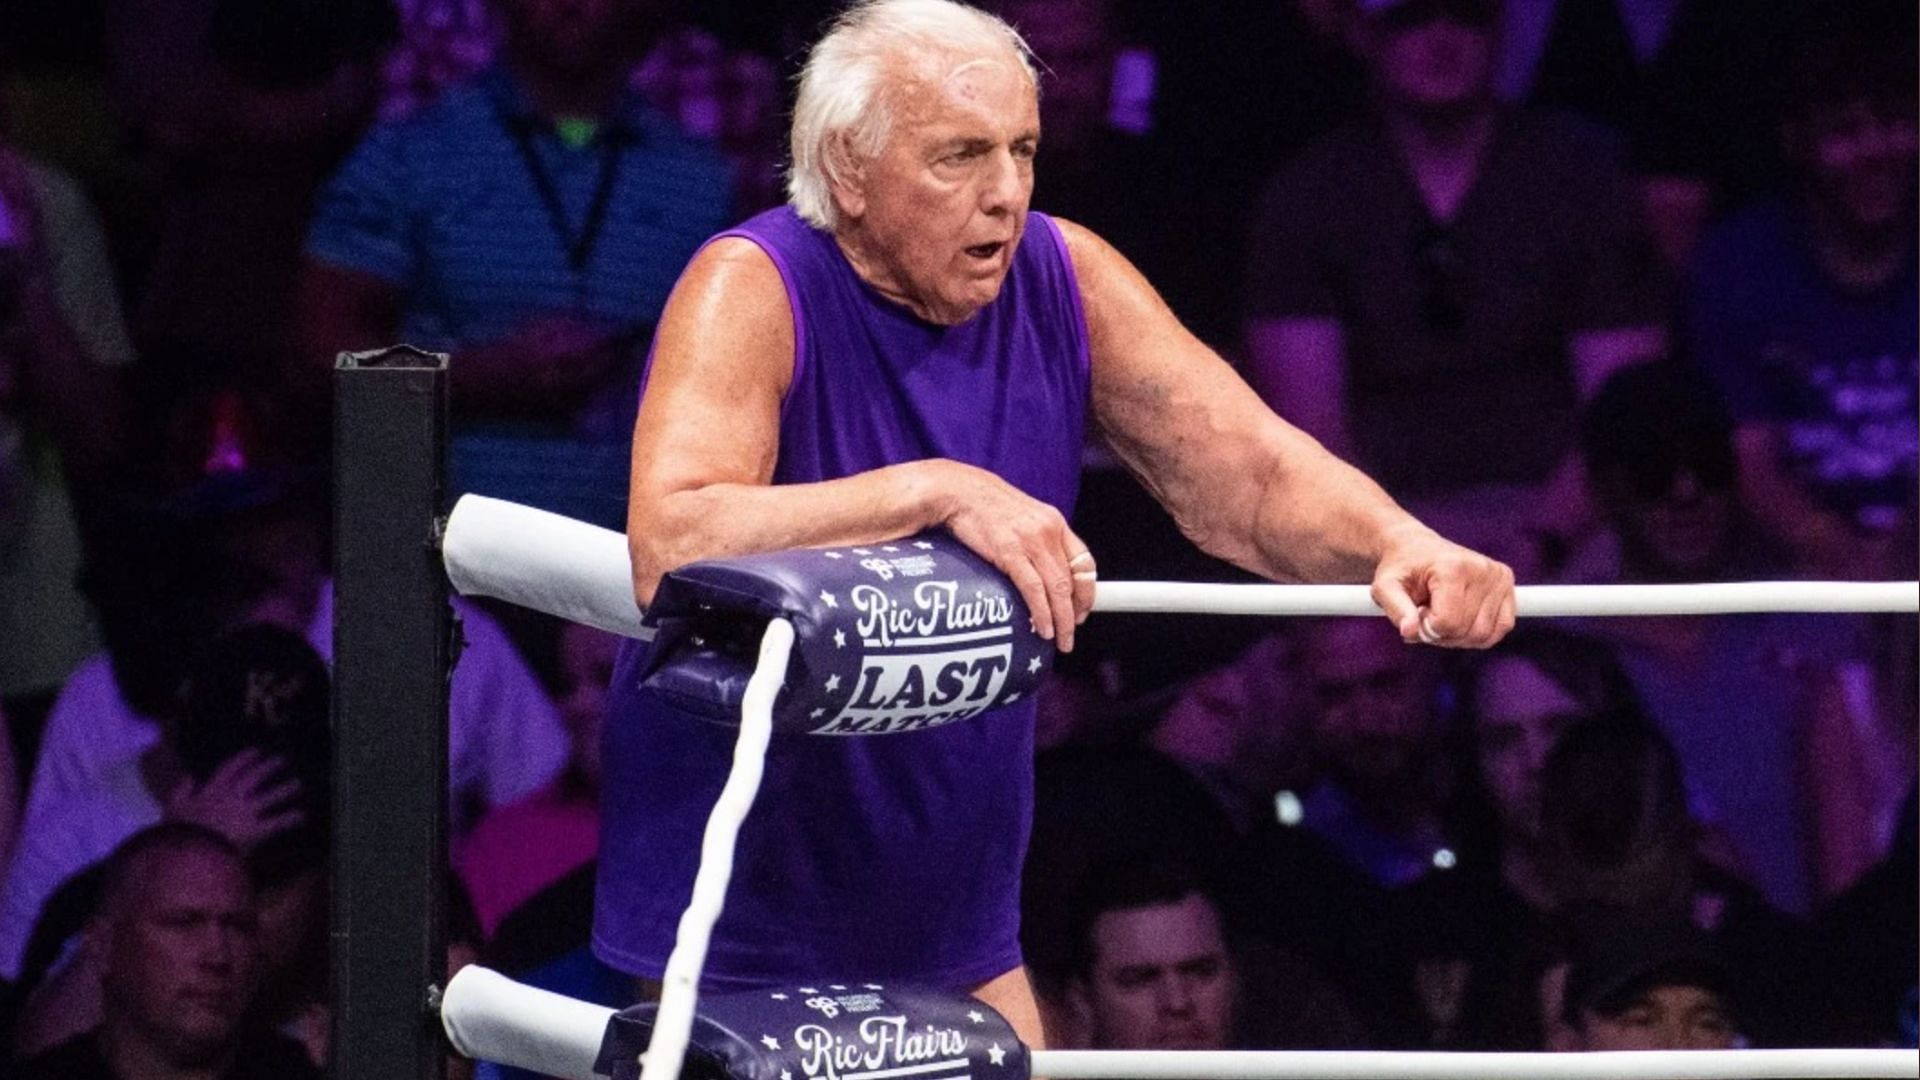 Ric Flair's Last Match part of a 'master plan'